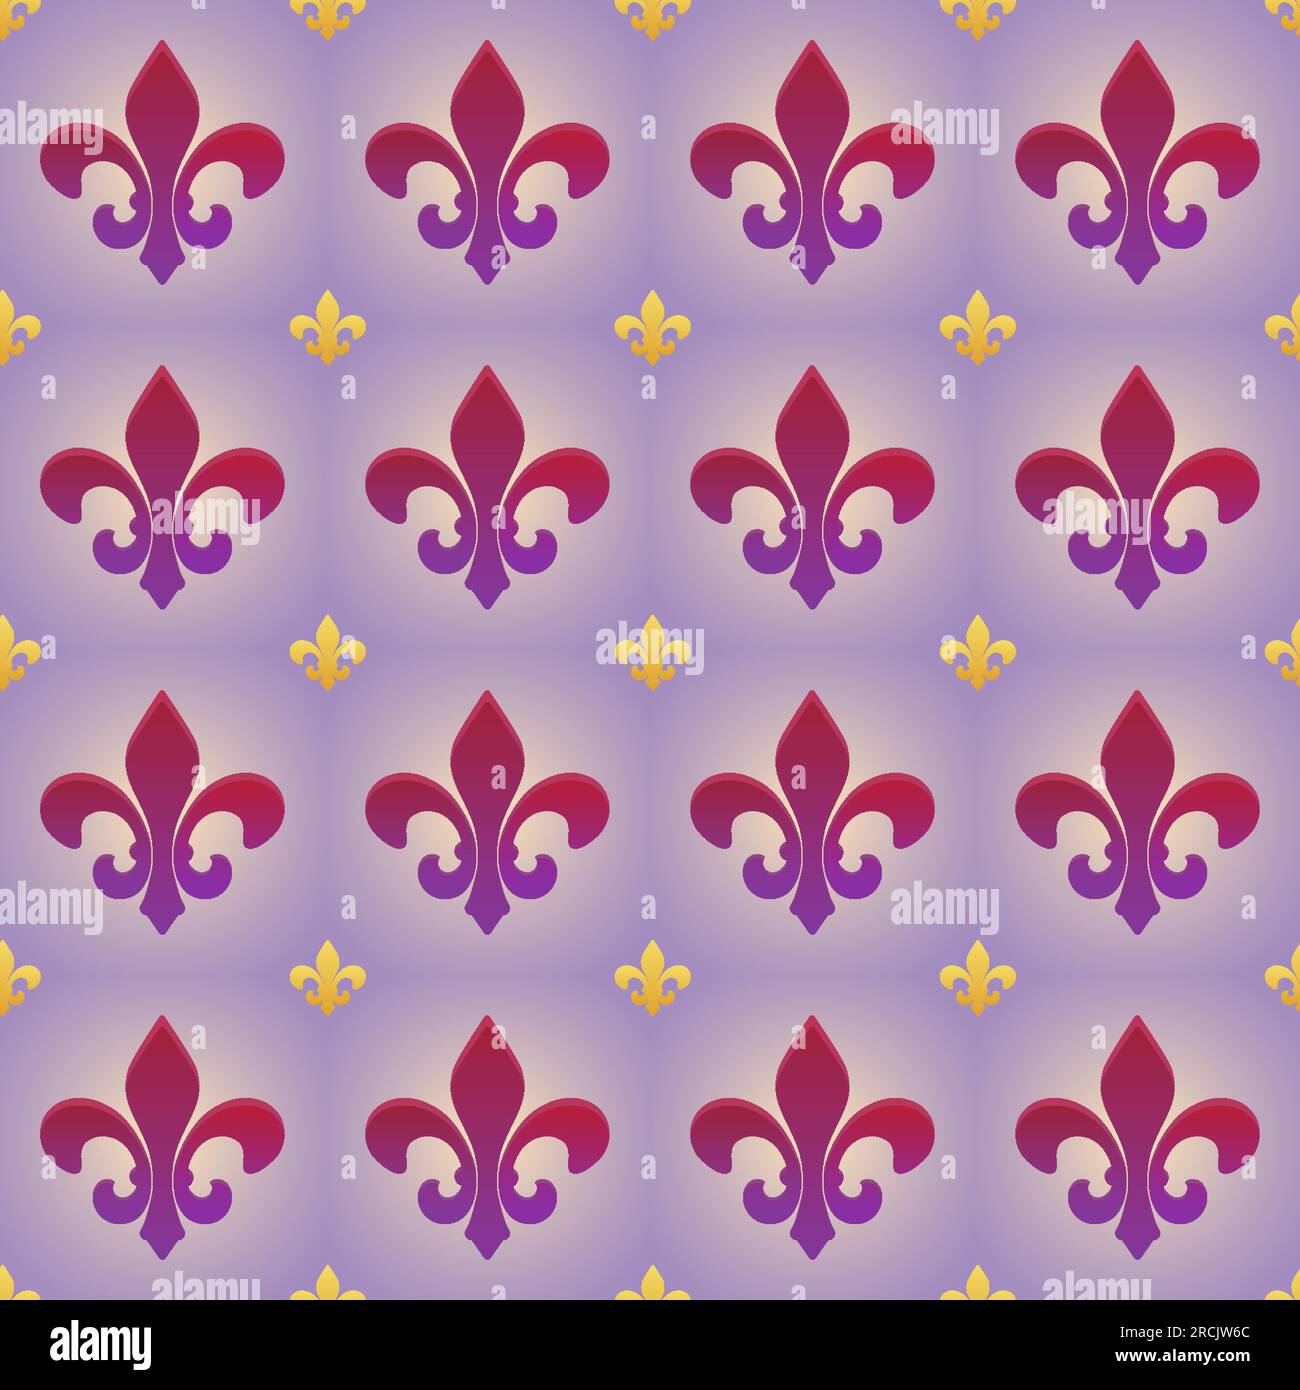 Fleur De Lis tile seamless pattern Royal French heraldic symbol golden and magenta color on blue background Vector illustration Isolated Stock Vector